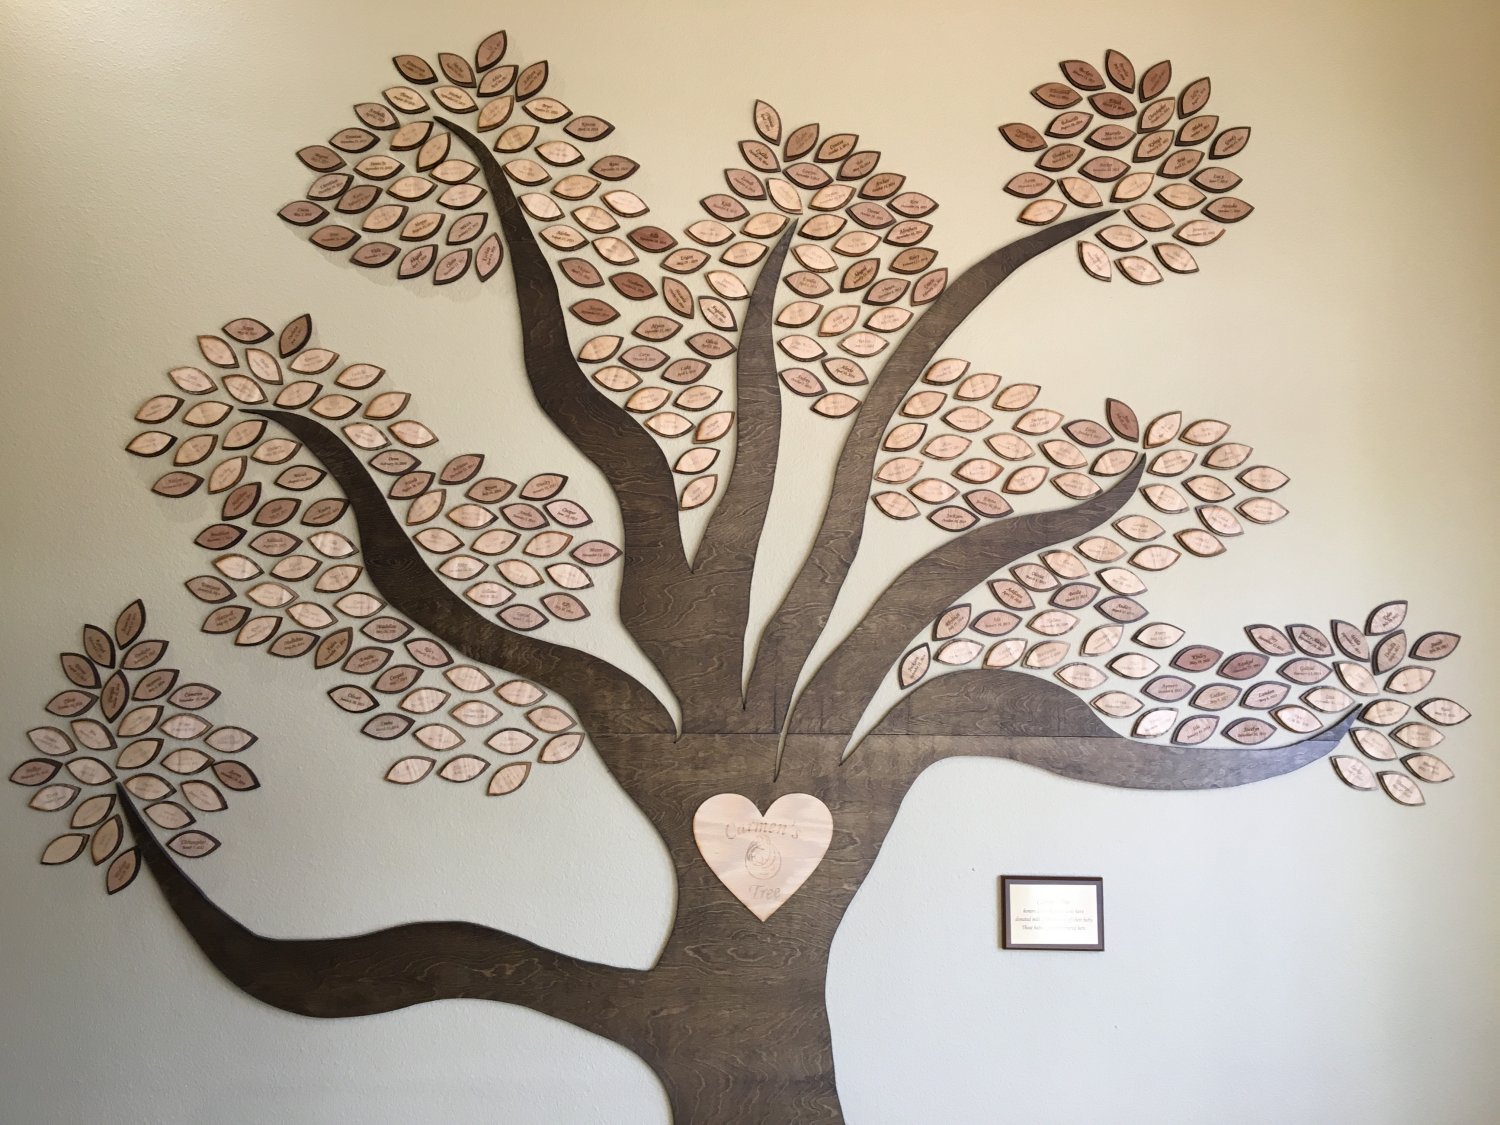 Wooden tree design on wall